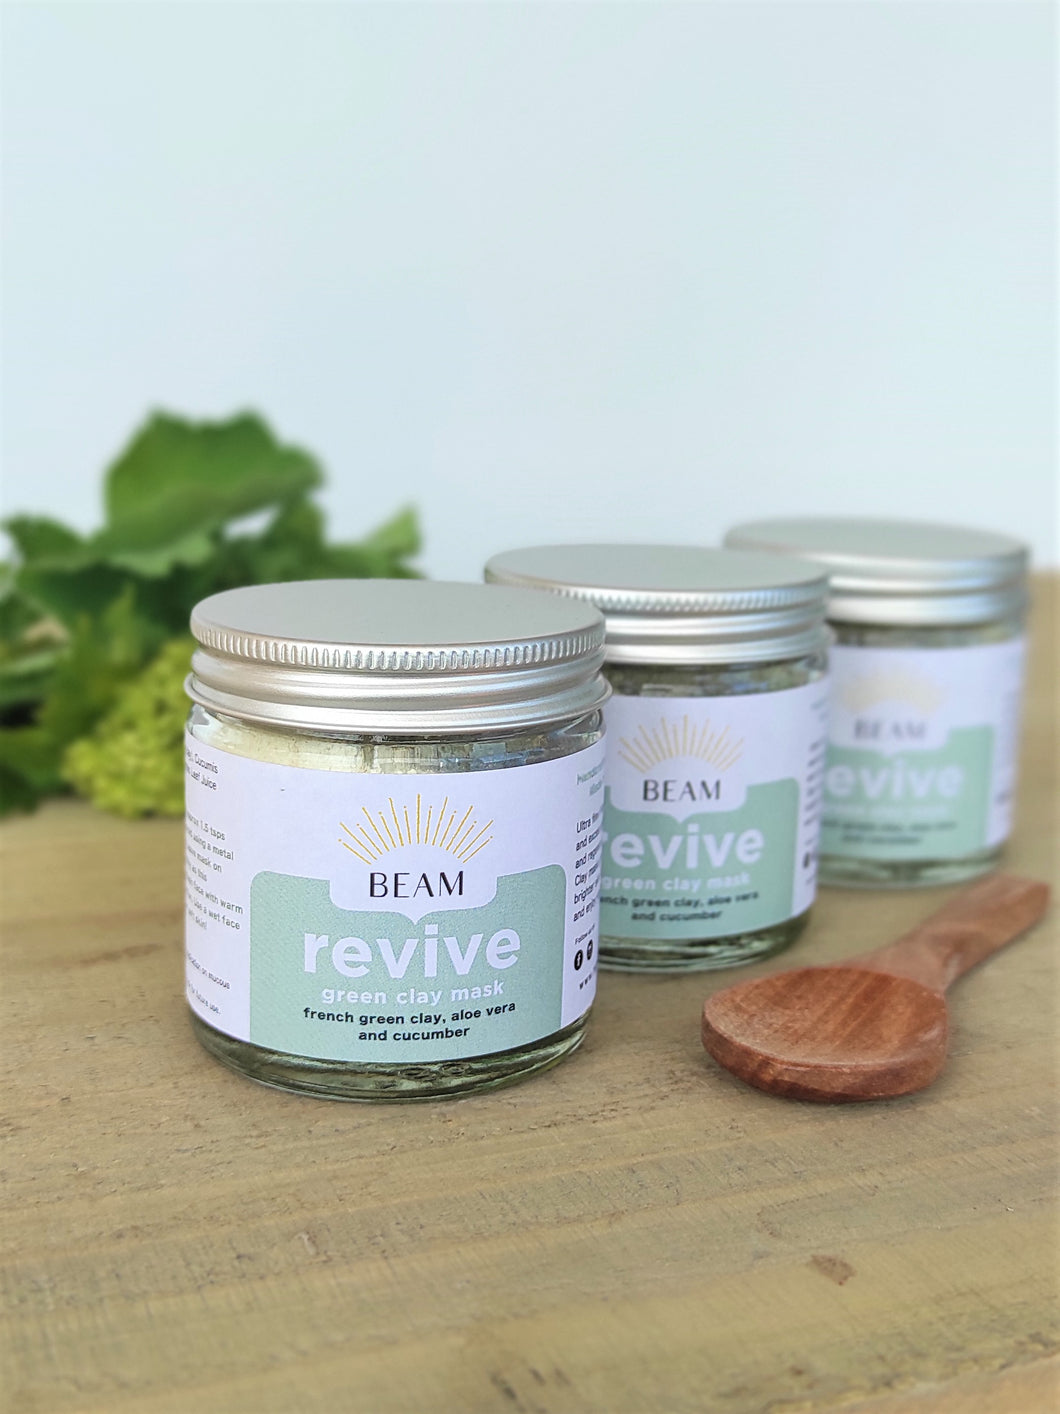 Revive clay face mask